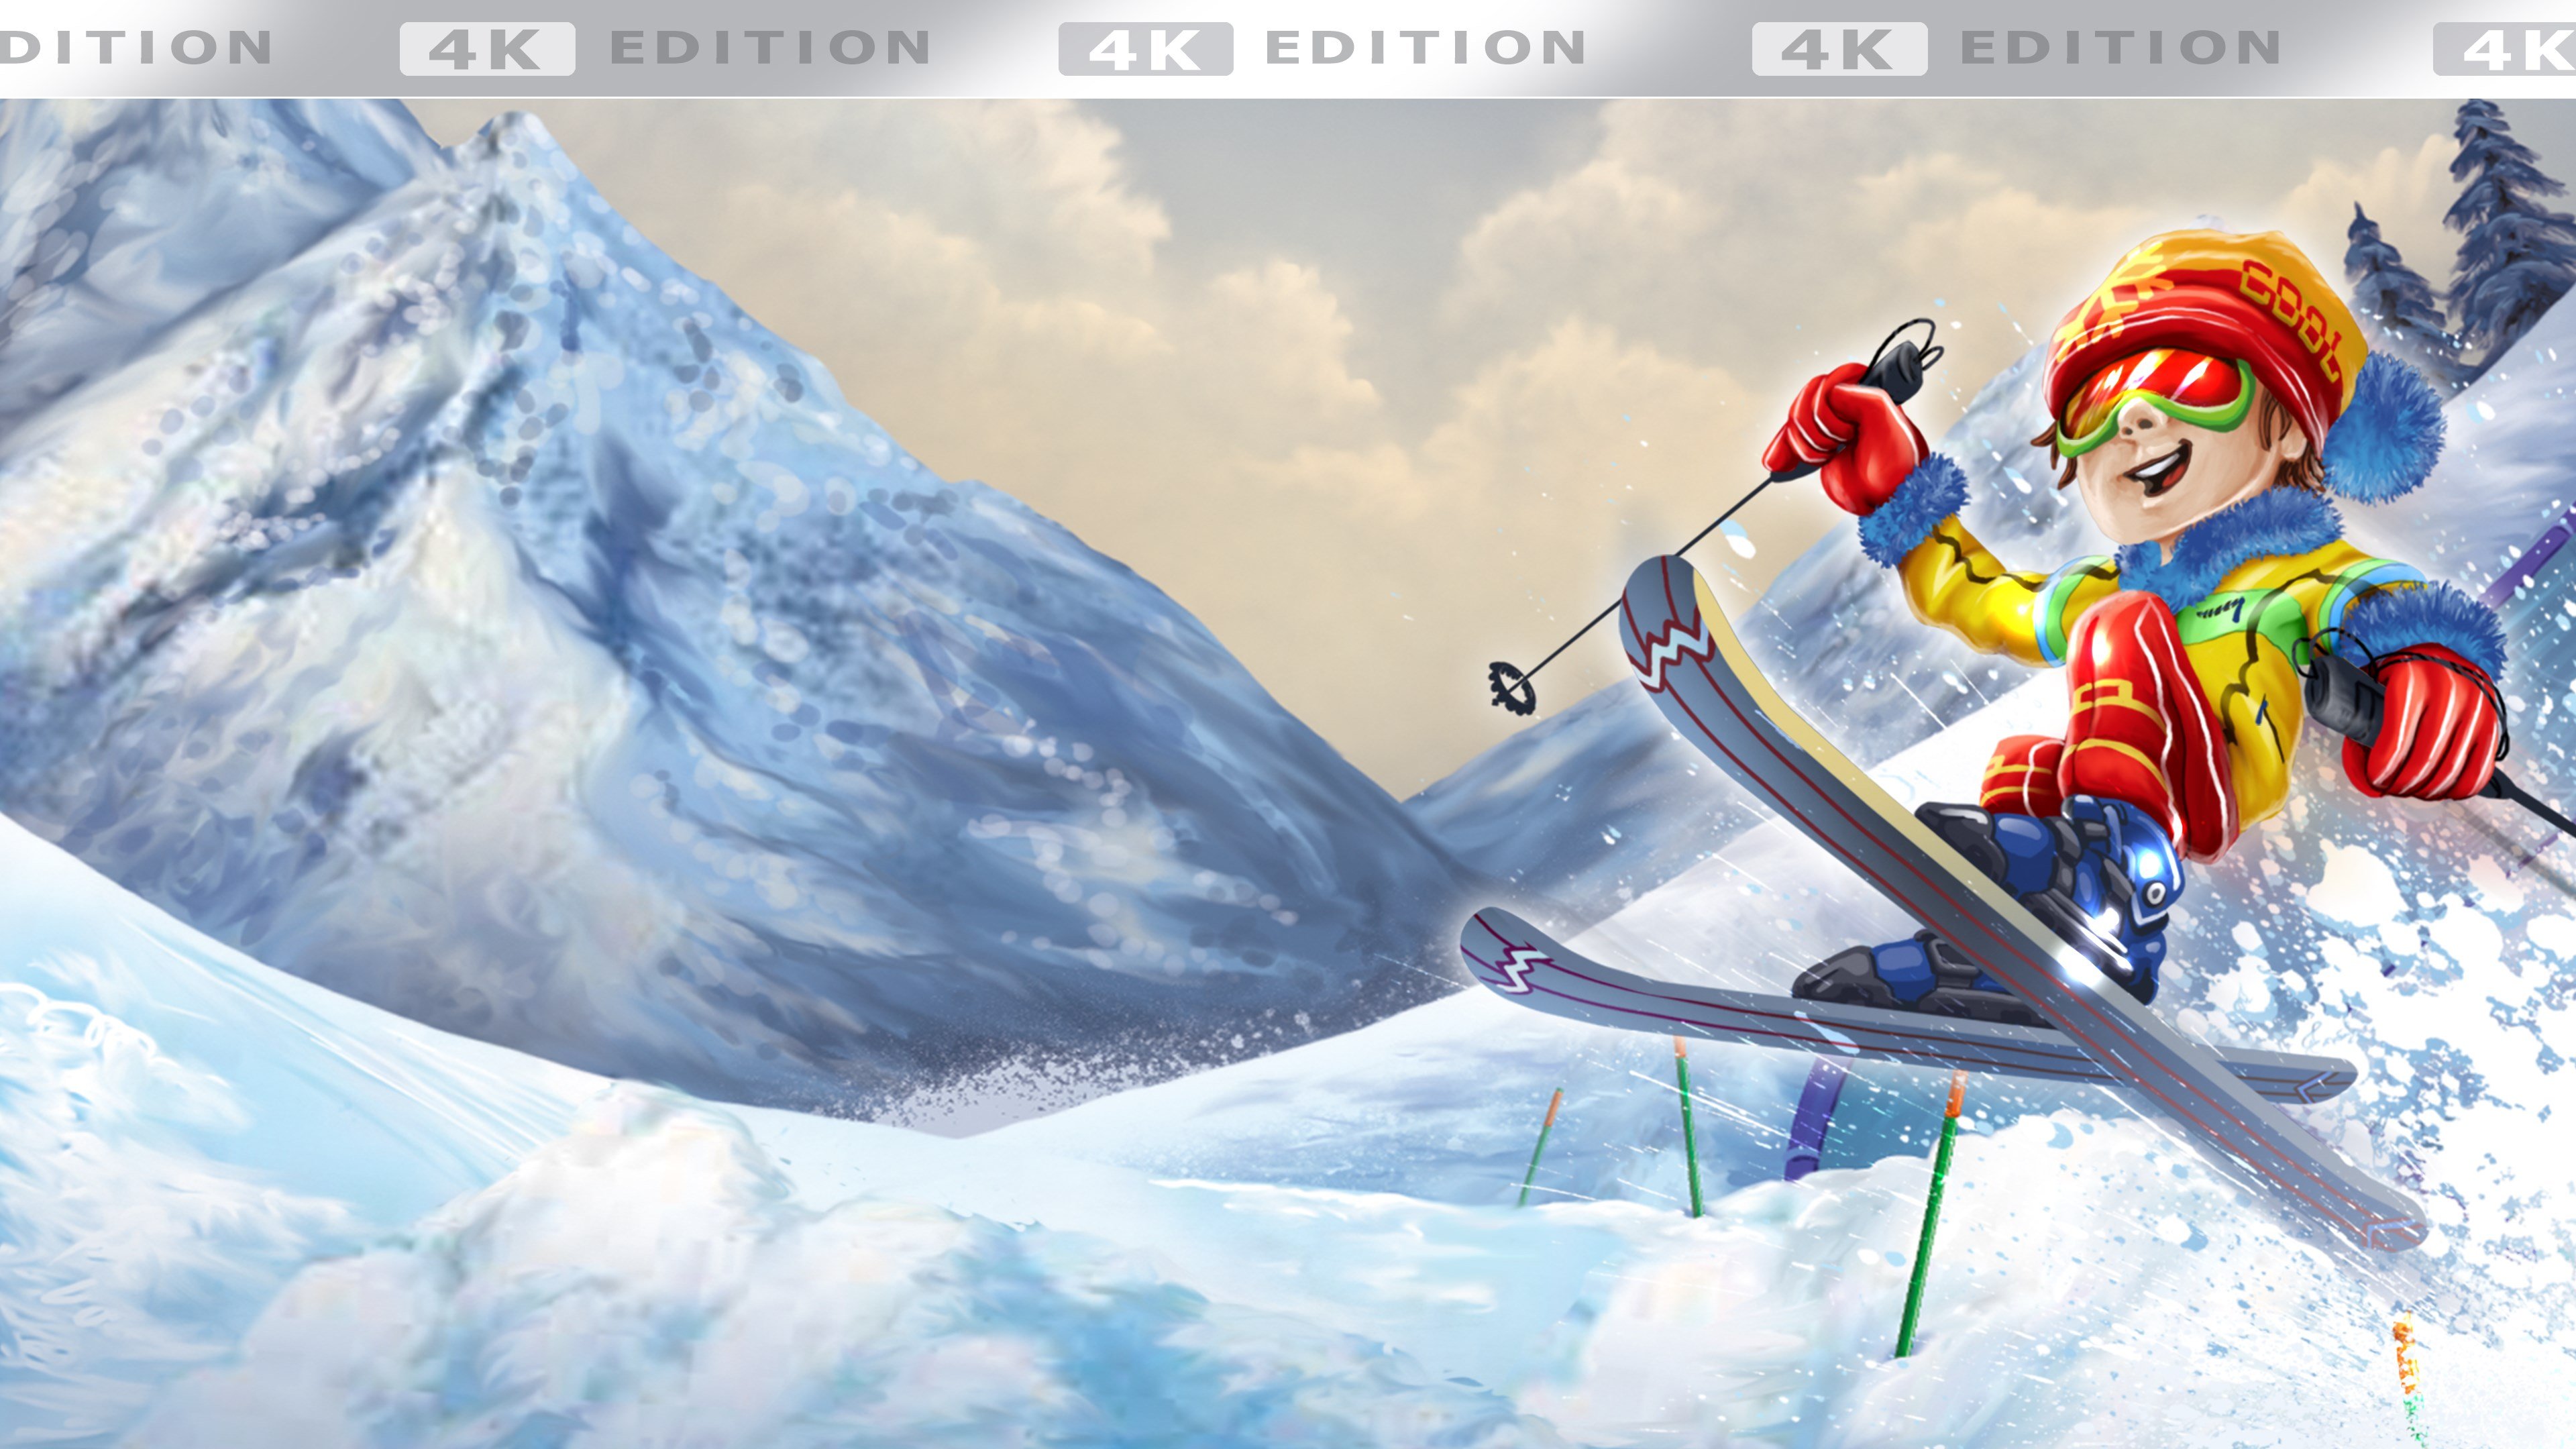 Winter Sports Games - 4K Edition cover image